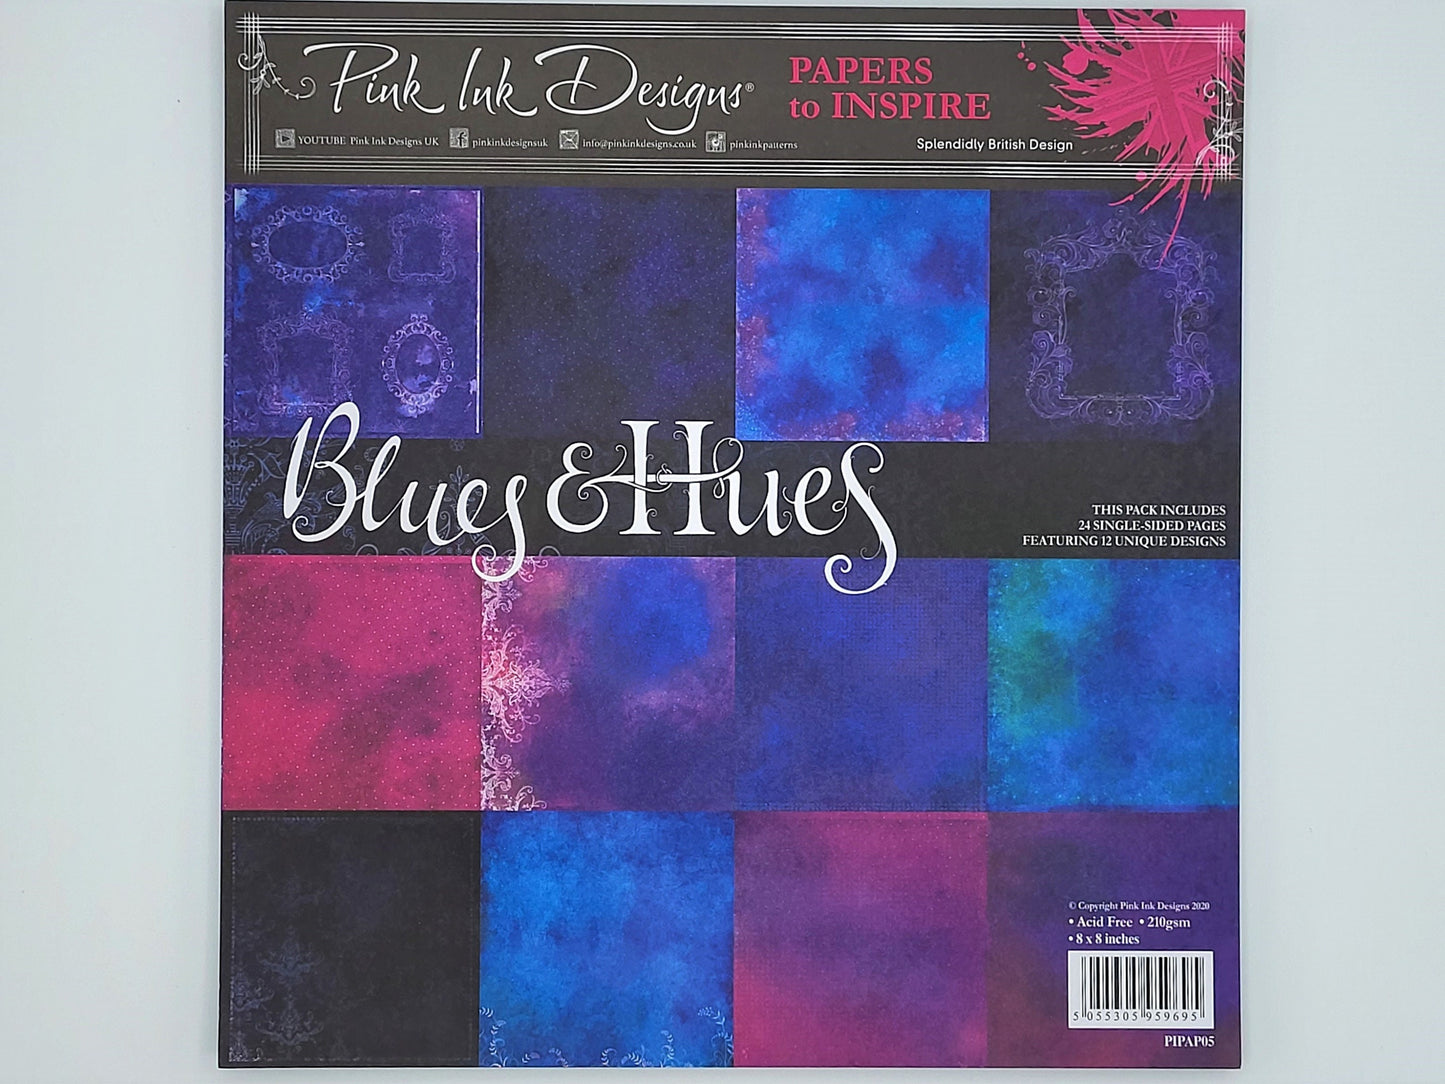 8x8" Paper Pad, Pink Ink Designs, Blues and Hues, 24 sheets | Cardmaking supplies, Scrapbook paper